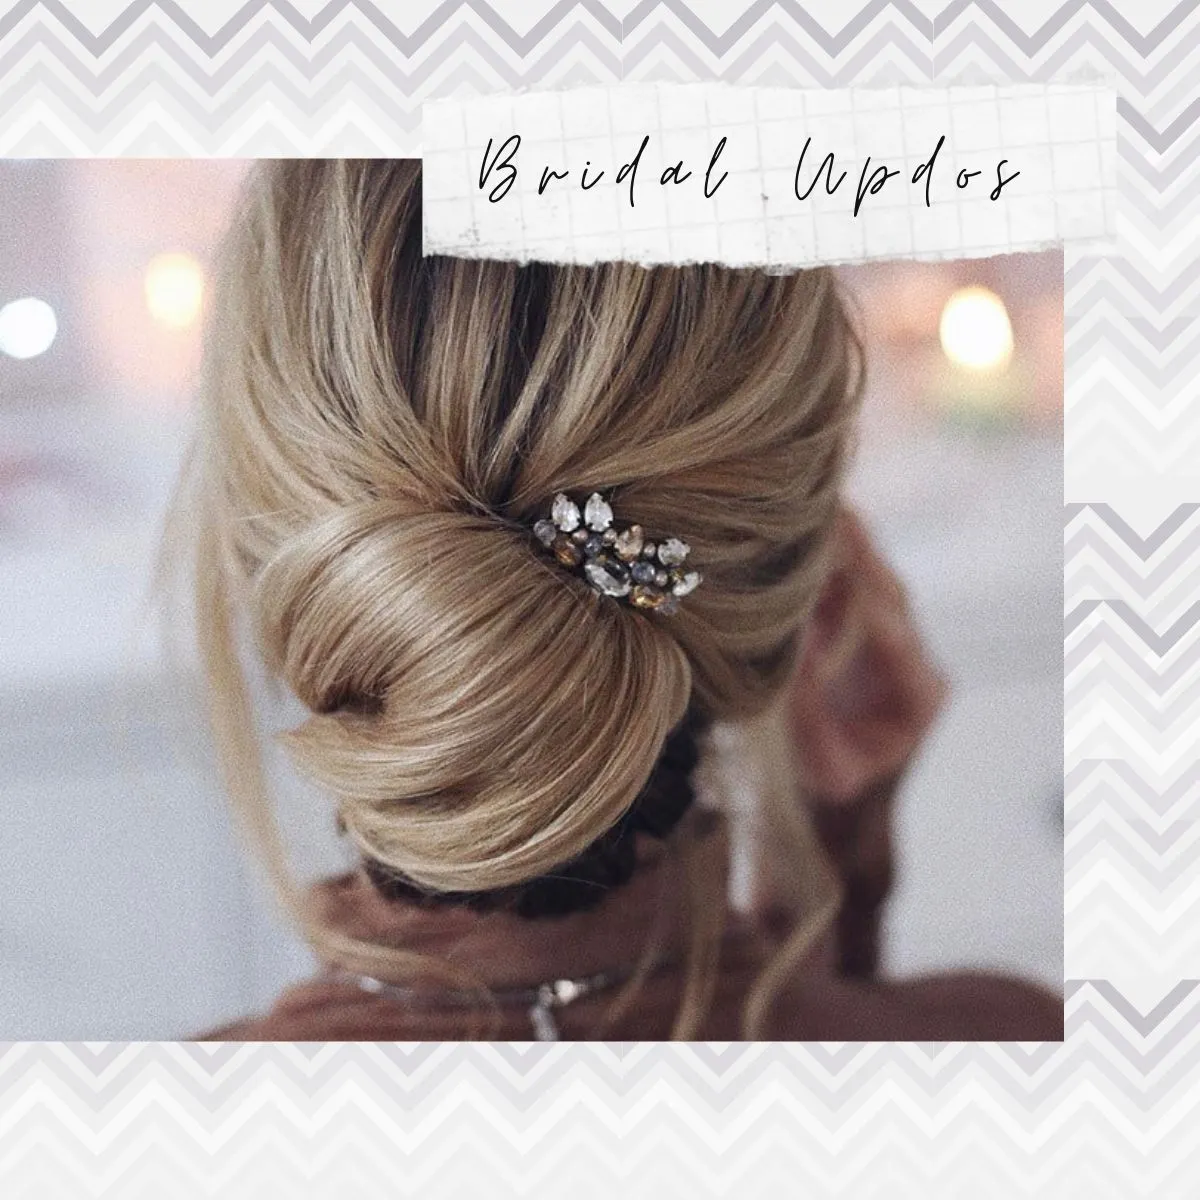 The wedding day is the most important milestone in every girl’s life. She wants to look amazing, so she needs to choose between some of the best bridal updos.